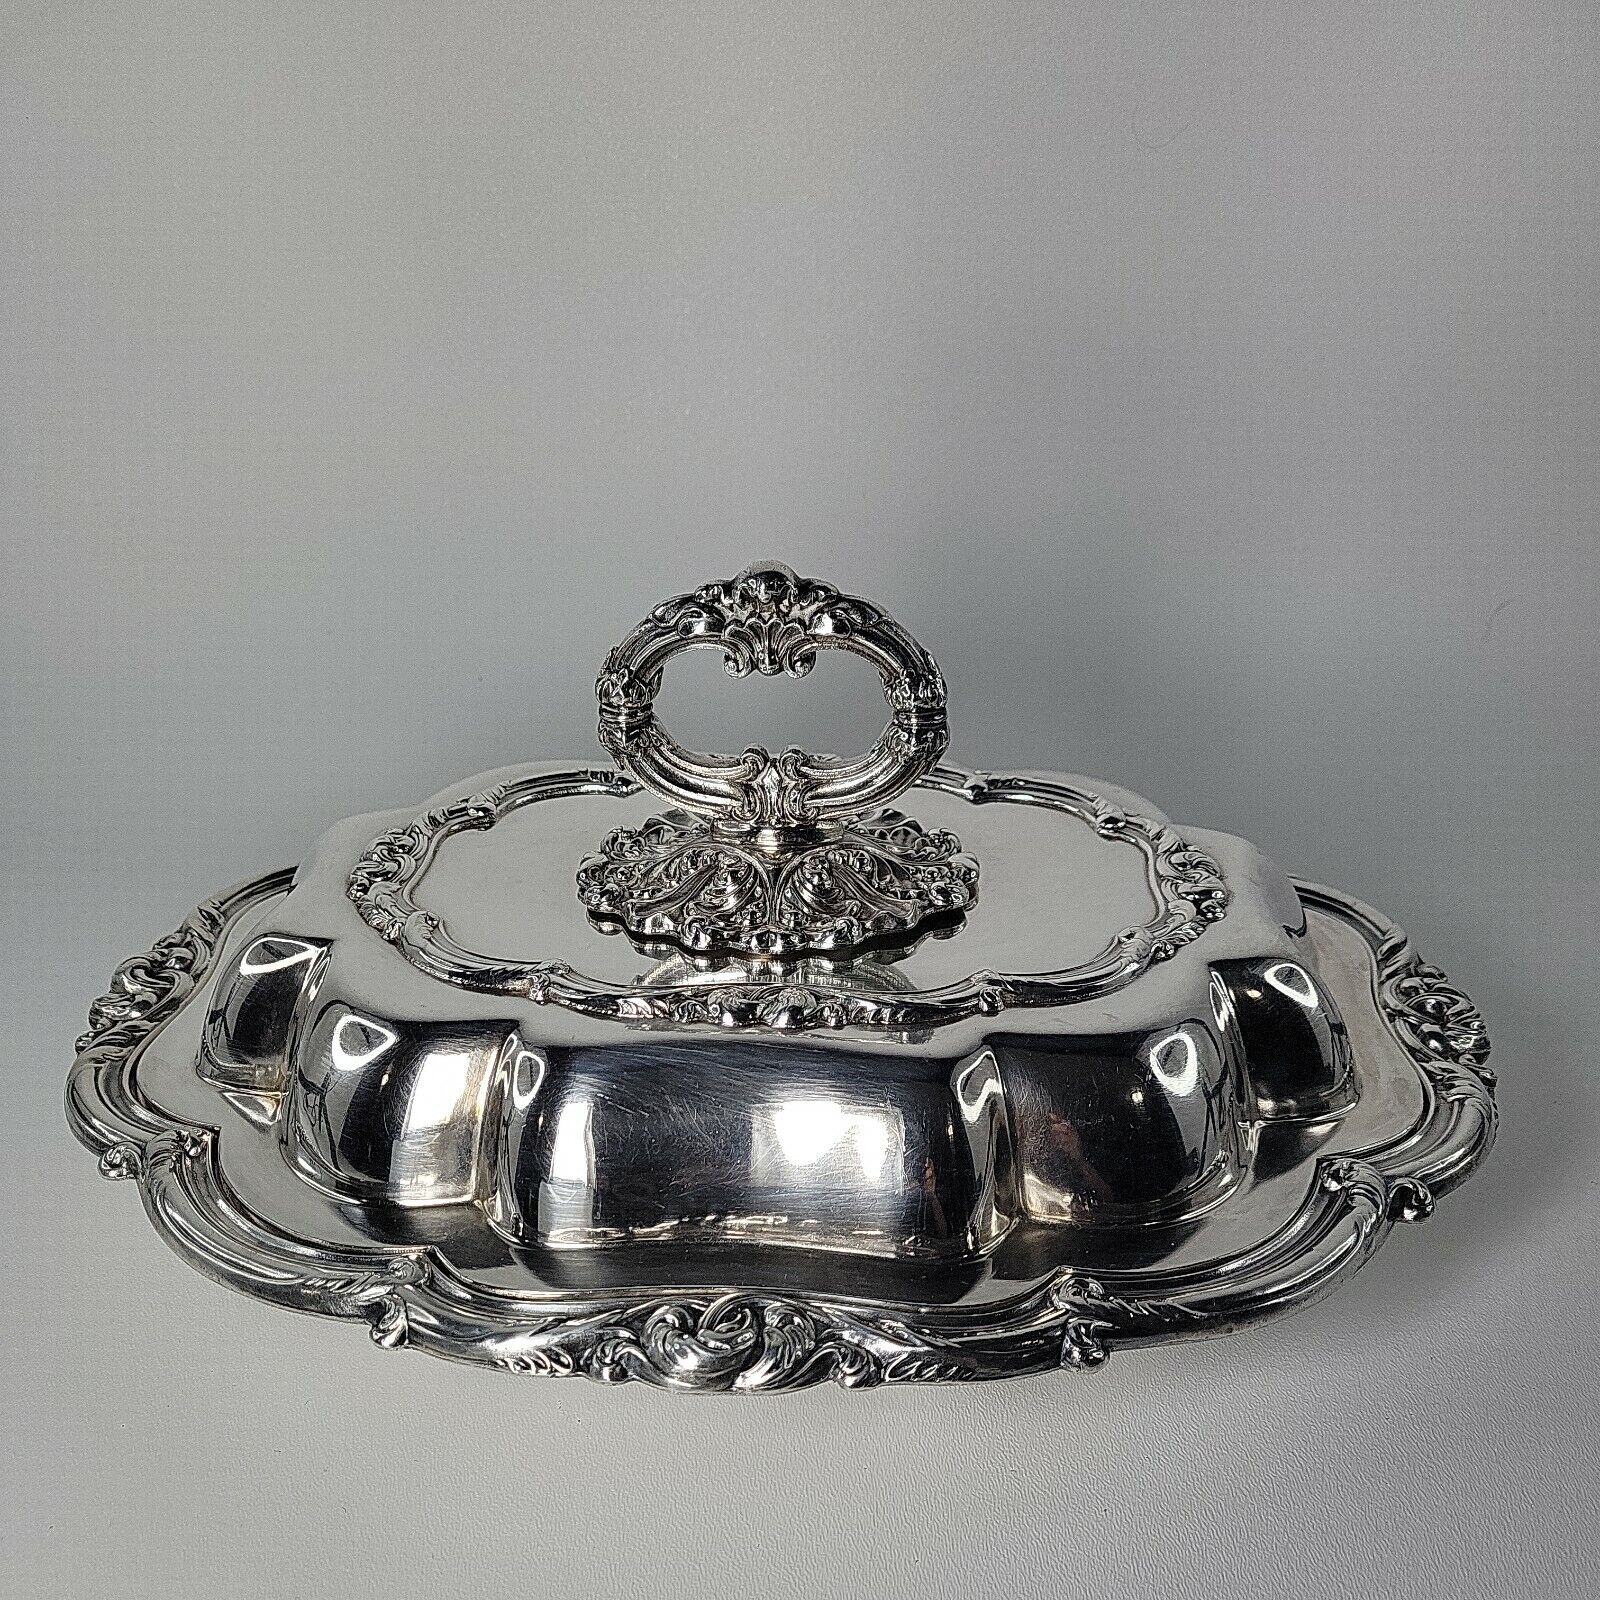 Barbour International Silver Plate Covered Entree Severing Dish